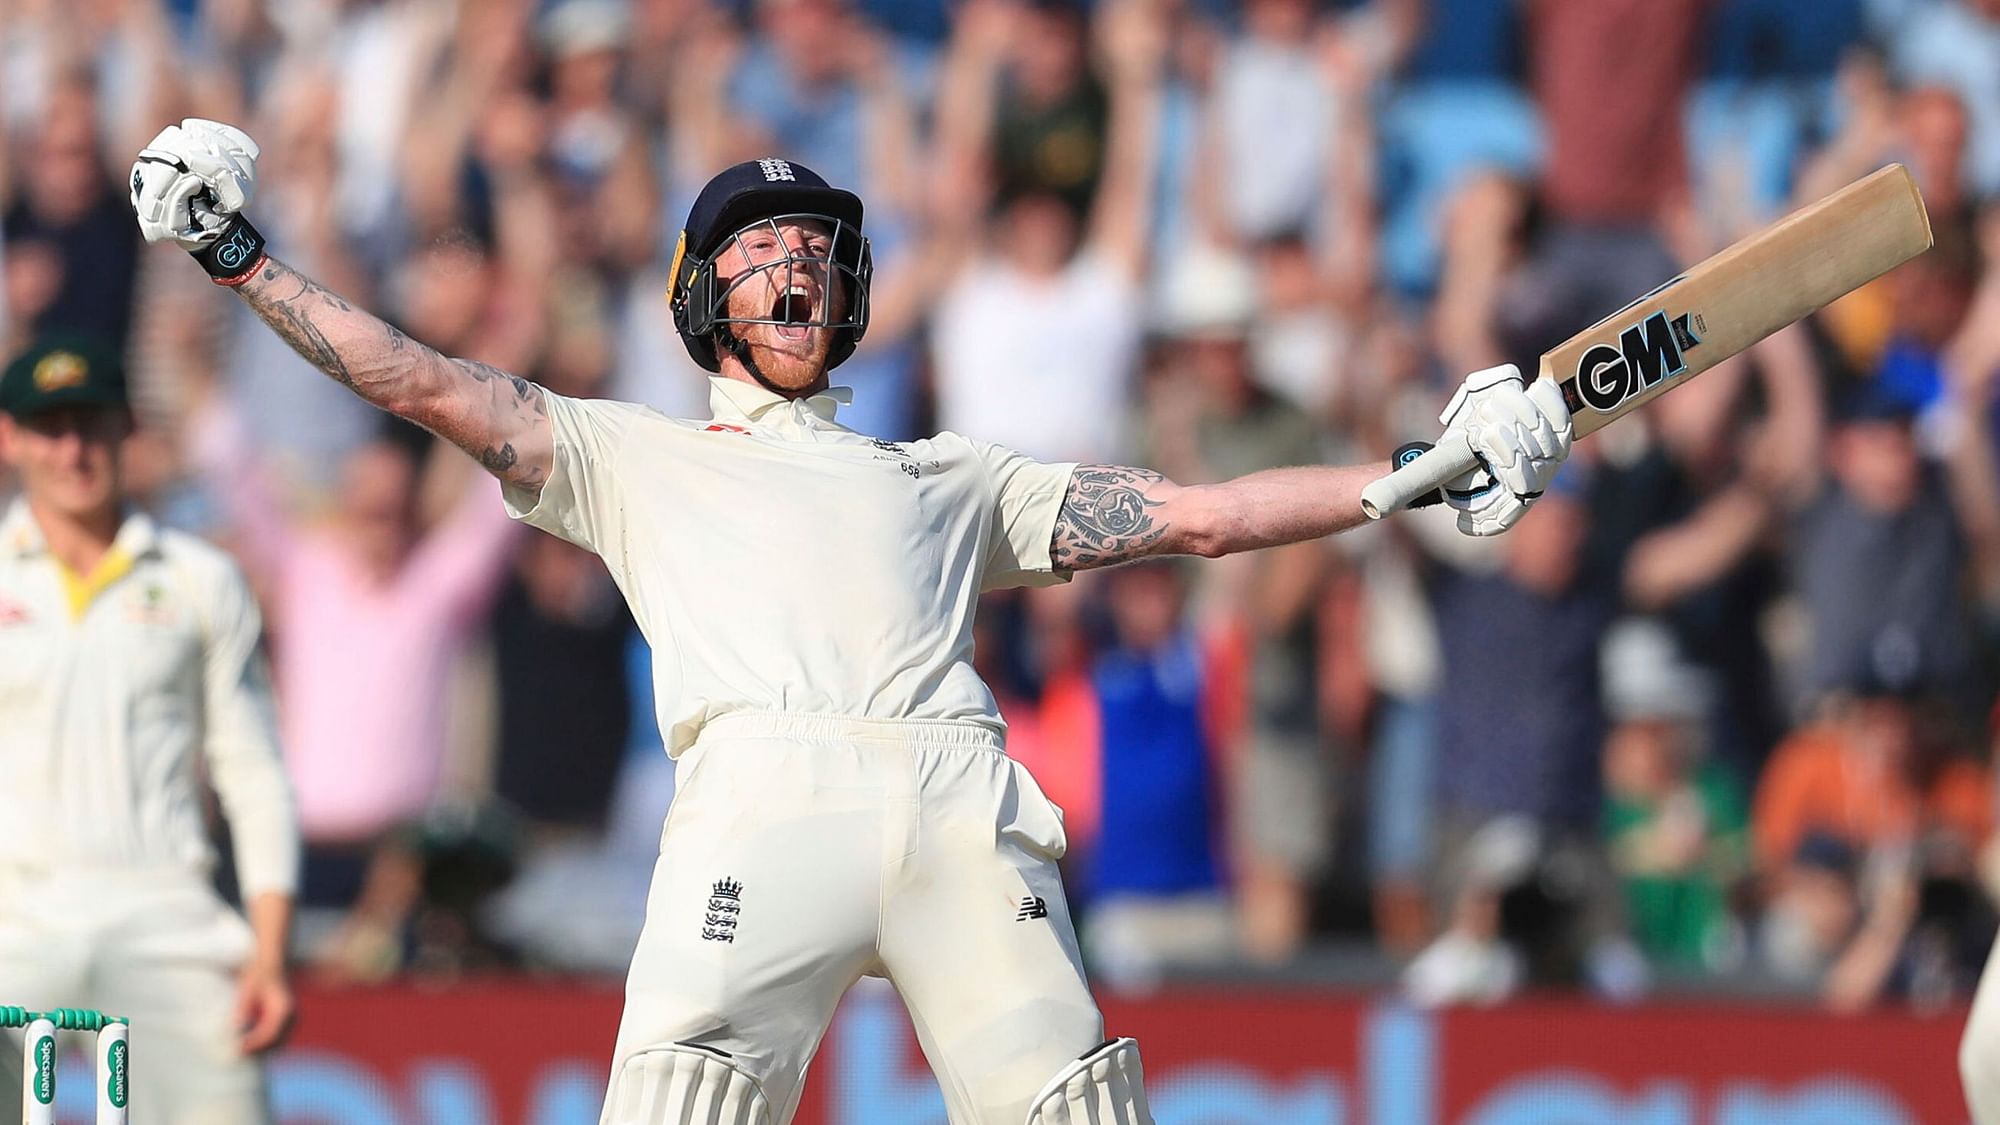 Cricket World Cup hero Ben Stokes scored a stunning 135 not out as England kept its Ashes hopes alive with a one-wicket win over Australia.